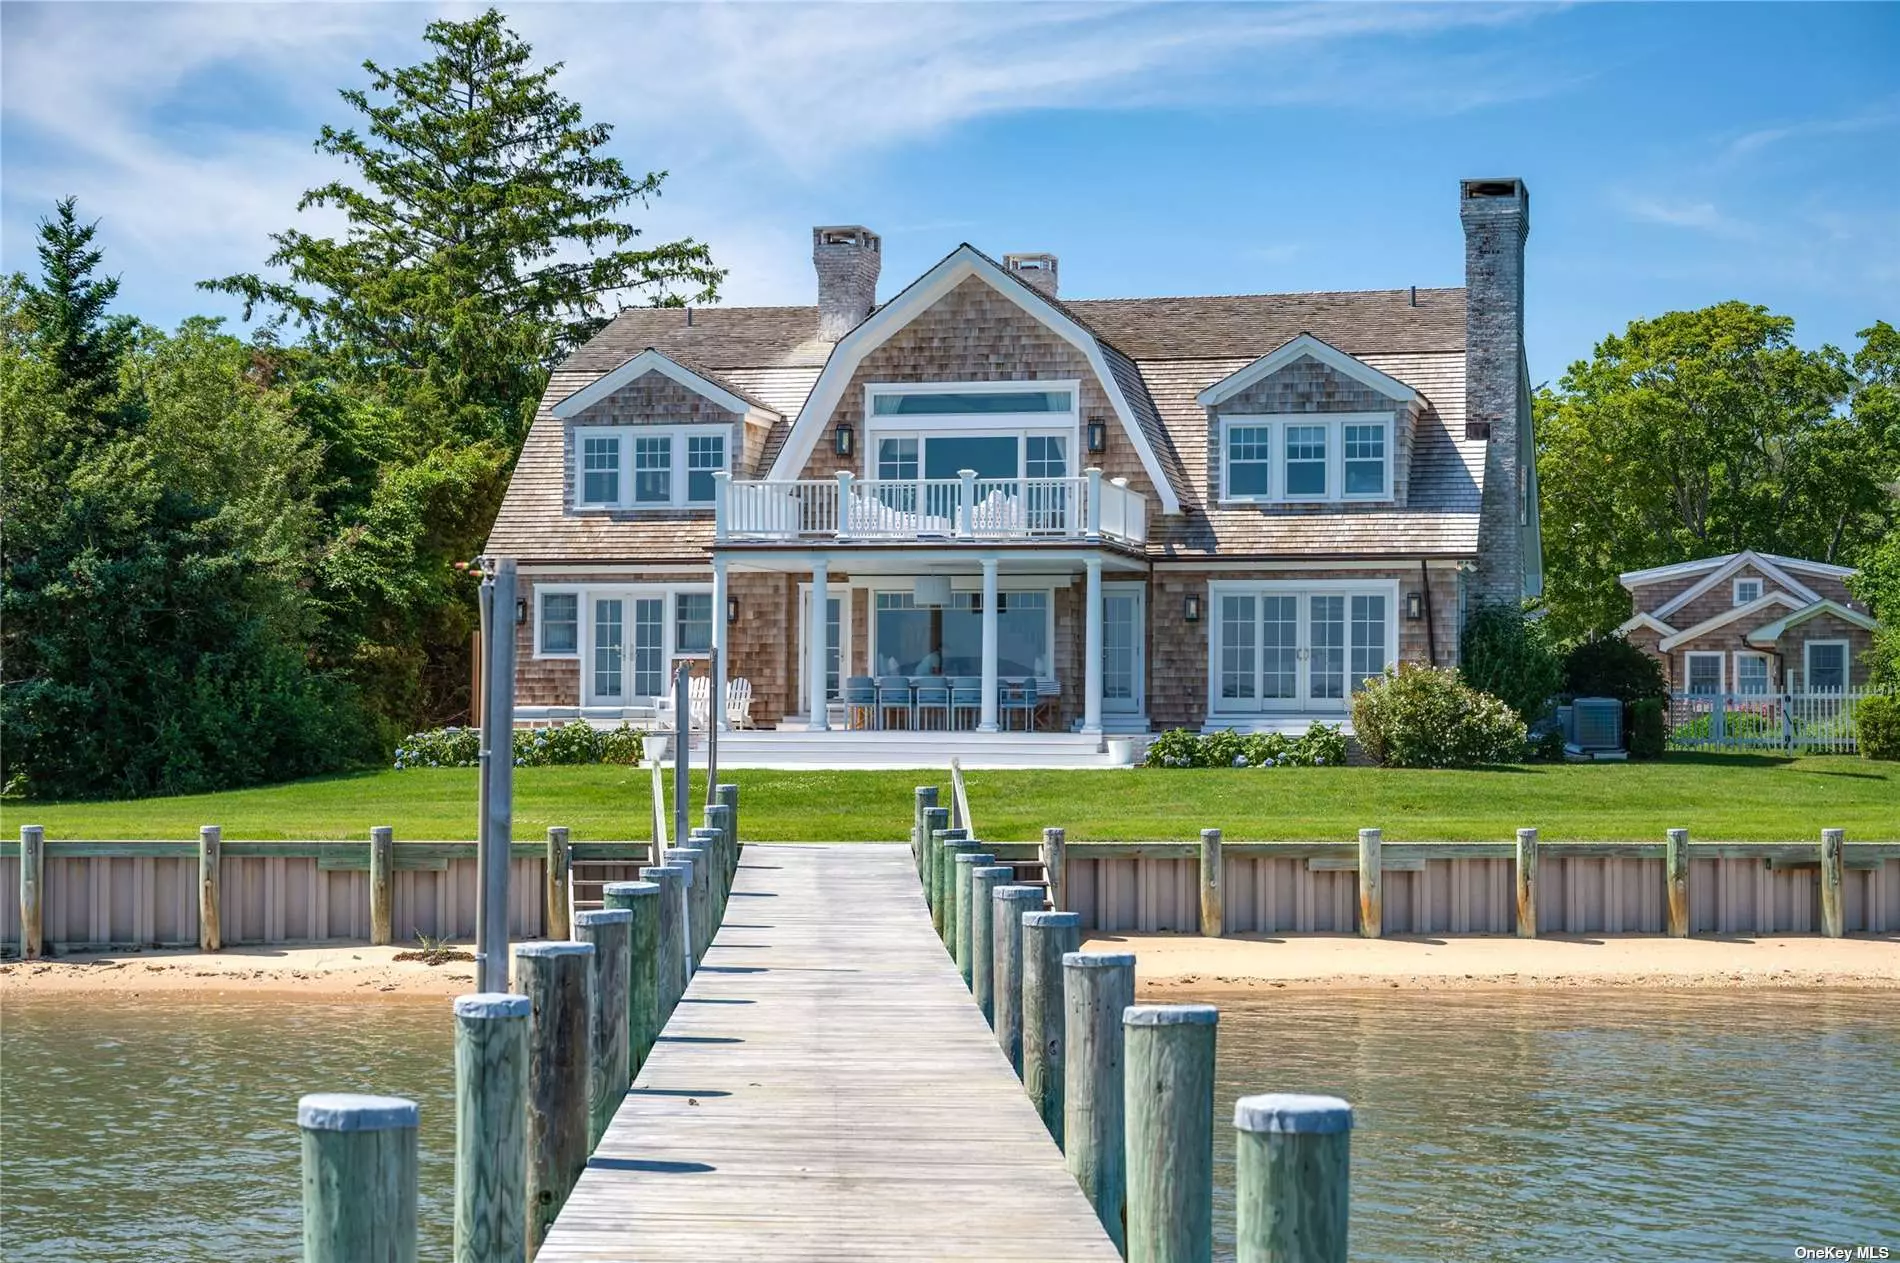 Enjoy all The Hamptons have to offer in this newly recreated waterfront home in the heart of West Neck Harbor! Complete with a boat and complimentary captain at the end of your private dock. Every detail was masterfully thought through by a leading design team. The floor plan offers a first-floor primary suite, four additional private guest bedrooms with two gracious common living spaces, a dining area and adjacent guest cottage. Every room was uniquely designed, each having endless water views of West Neck Harbor. Outdoor living includes a heated, salt water, gunite pool with spa, accompanied by a sauna and outdoor shower. From the patio, take a walk down the waterfront deck to watch the stunning sunset. Soak in every minute of summer at this waterfront retreat.